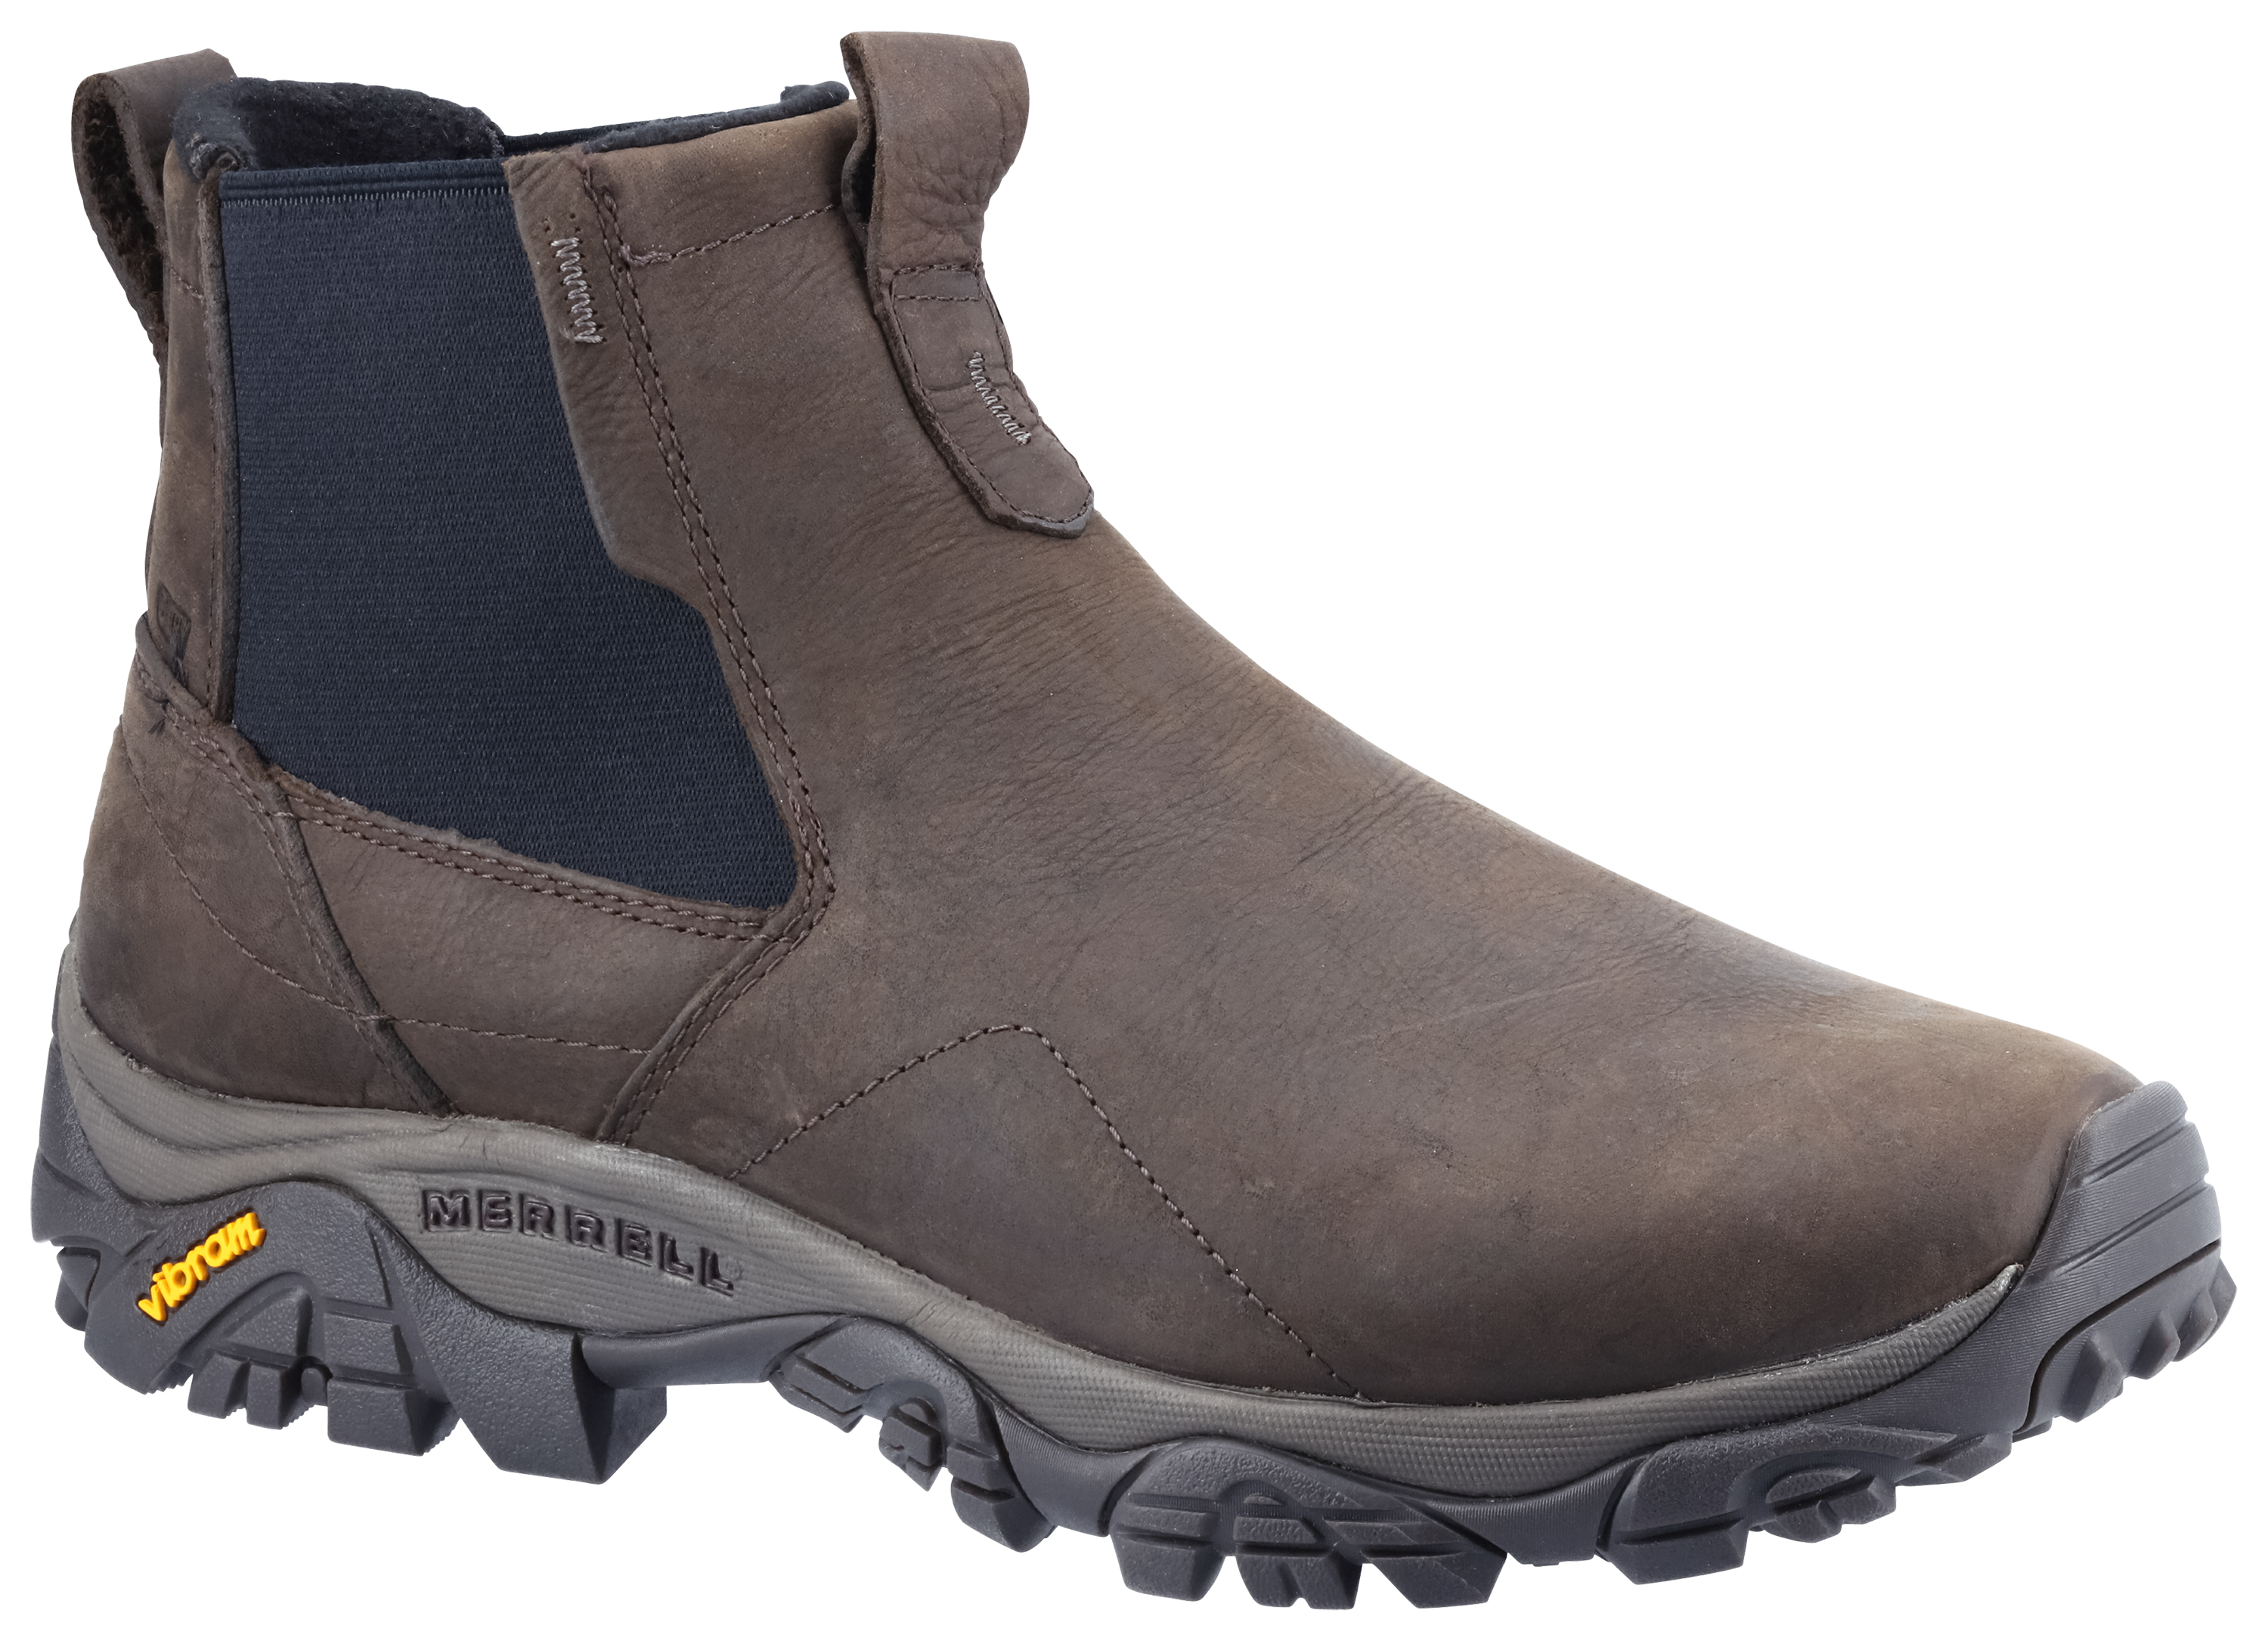 Merrell Moab Adventure Chelsea Polar Waterproof Ankle Boots for